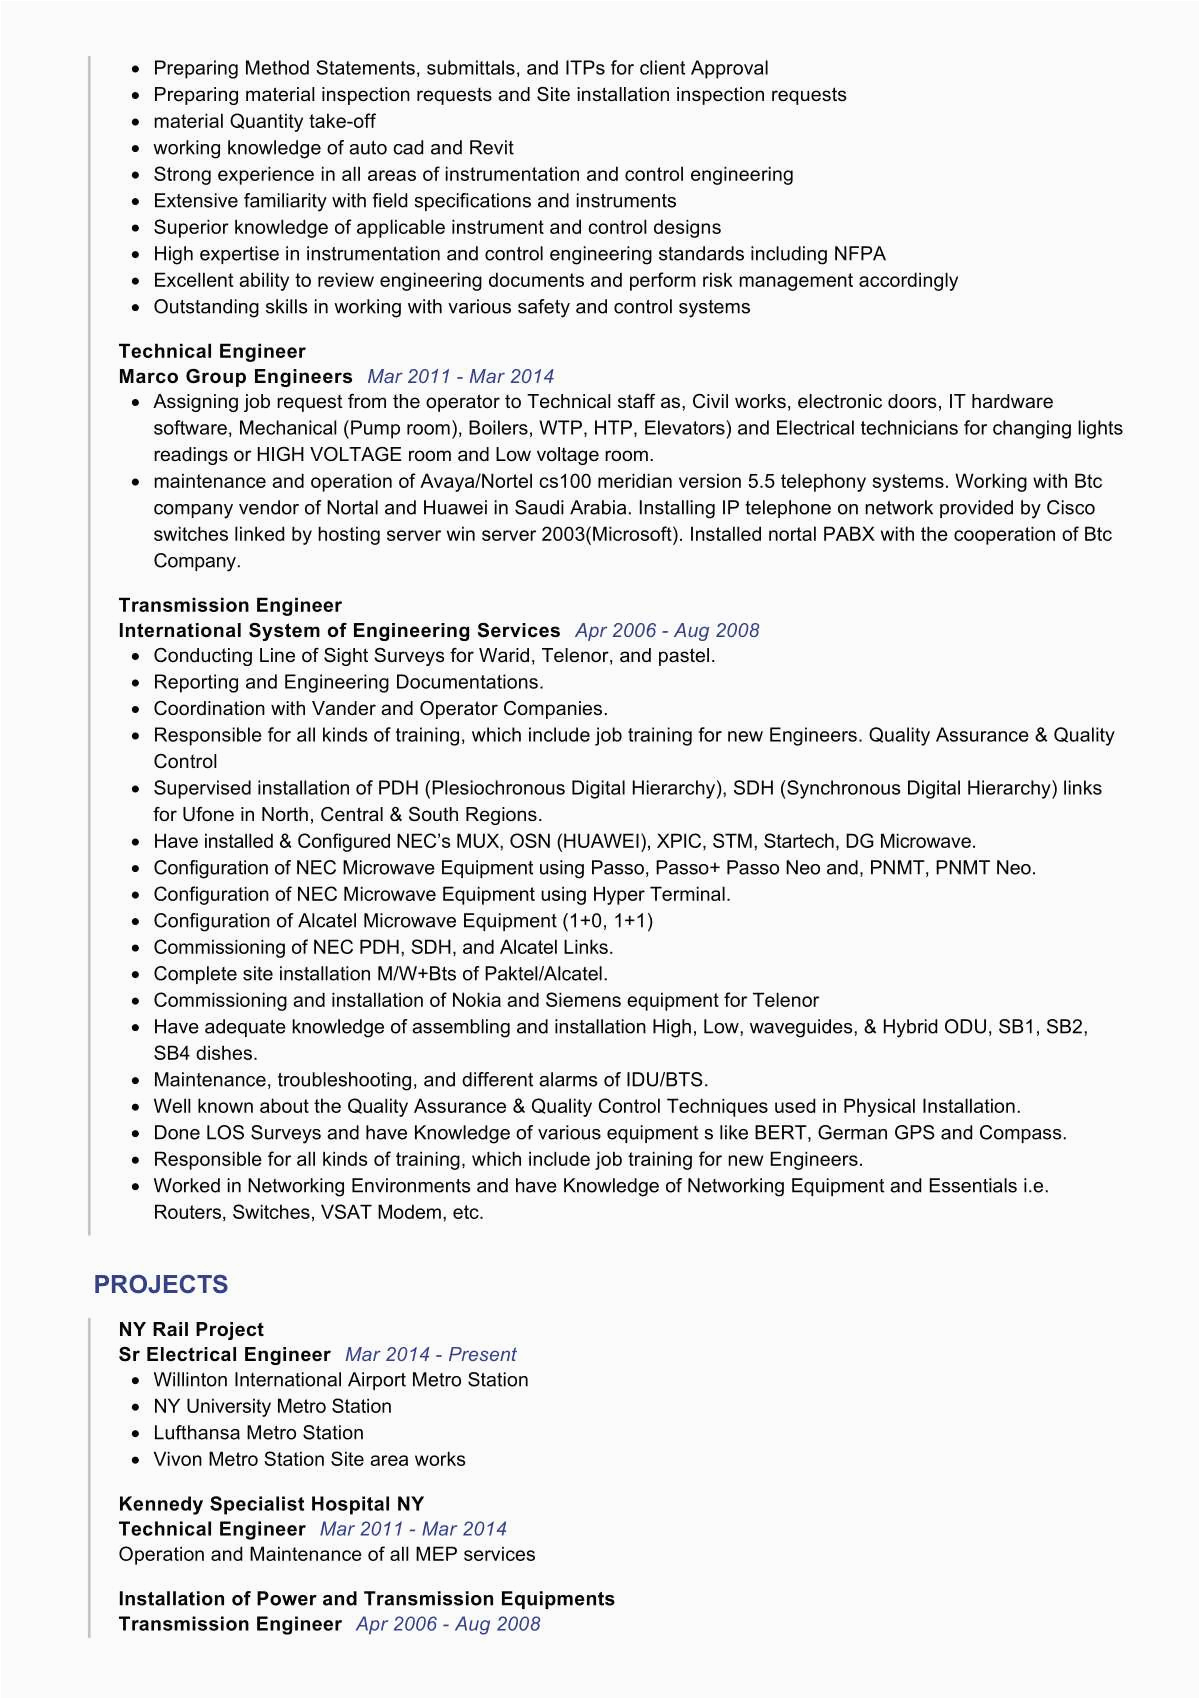 Free Resume Templates for Electrical Engineers Sr Electrical Engineer Resume Example Resumekraft